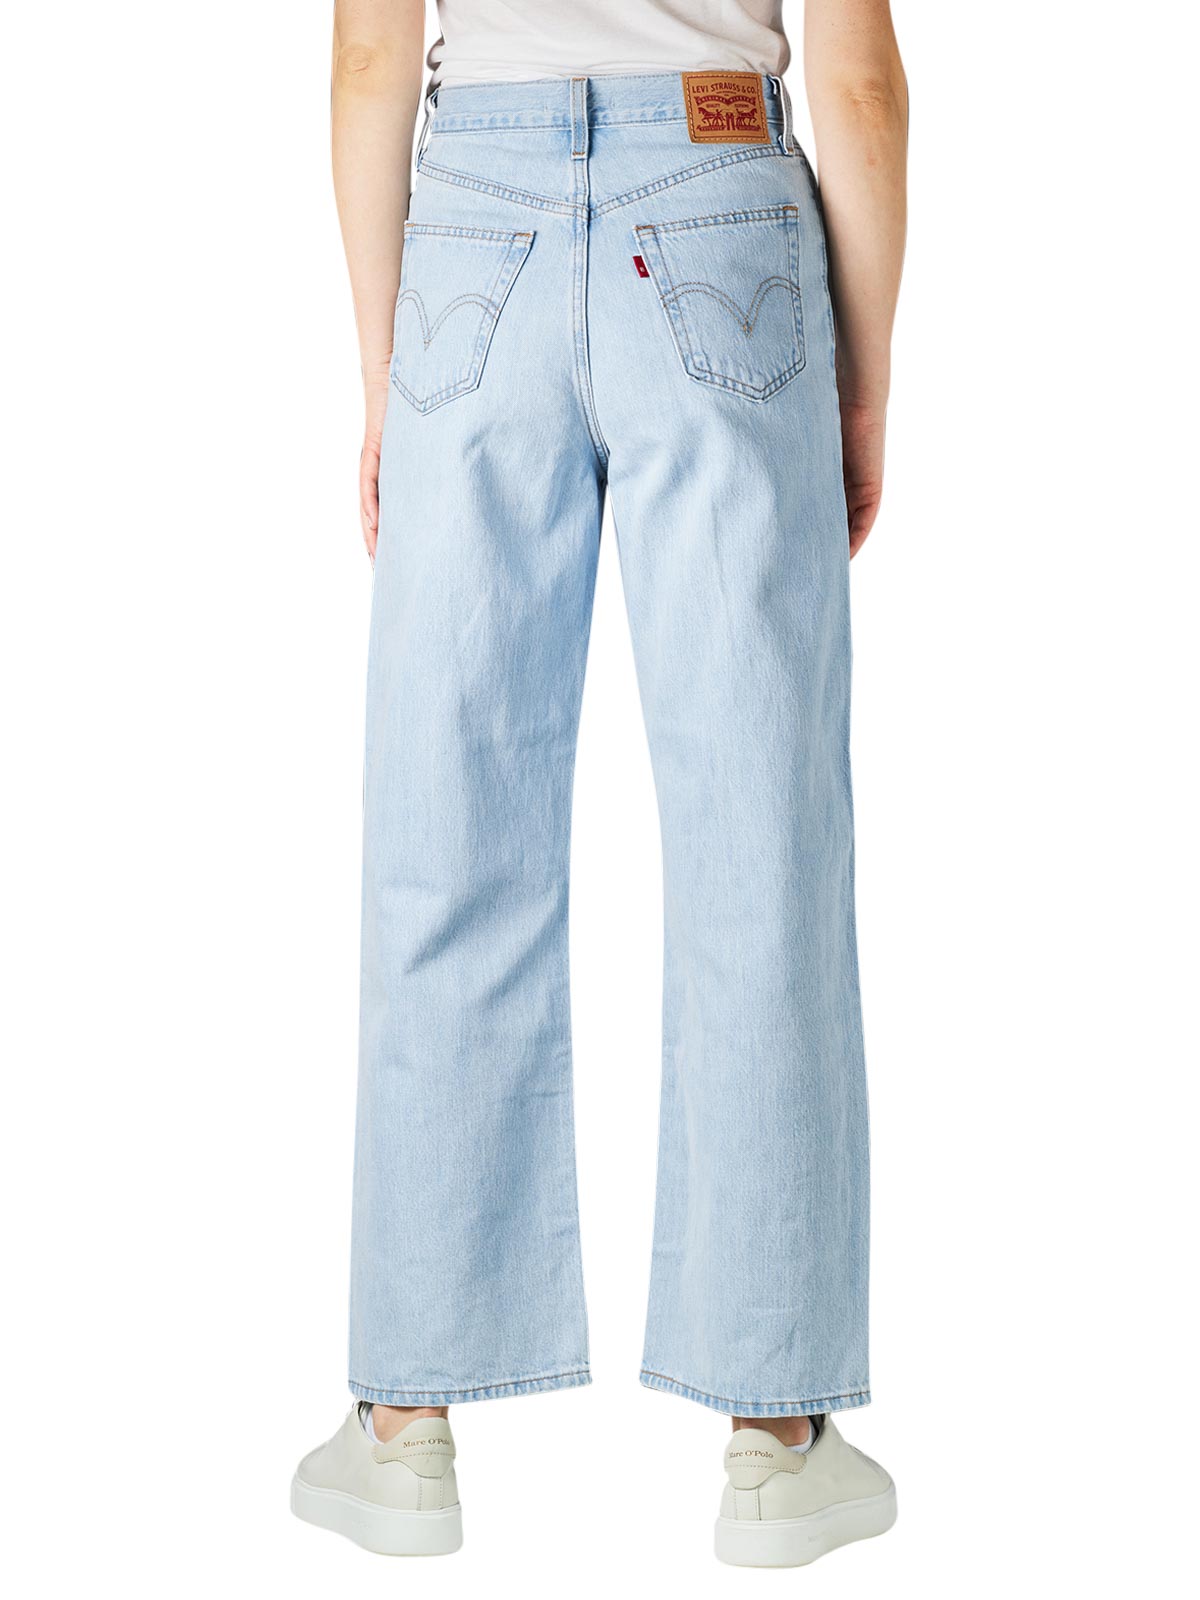 Levi's High Waisted Straight Jeans Joe Flush Levi's Women's Jeans | Free  Shipping on  - SIMPLY LOOK GOOD